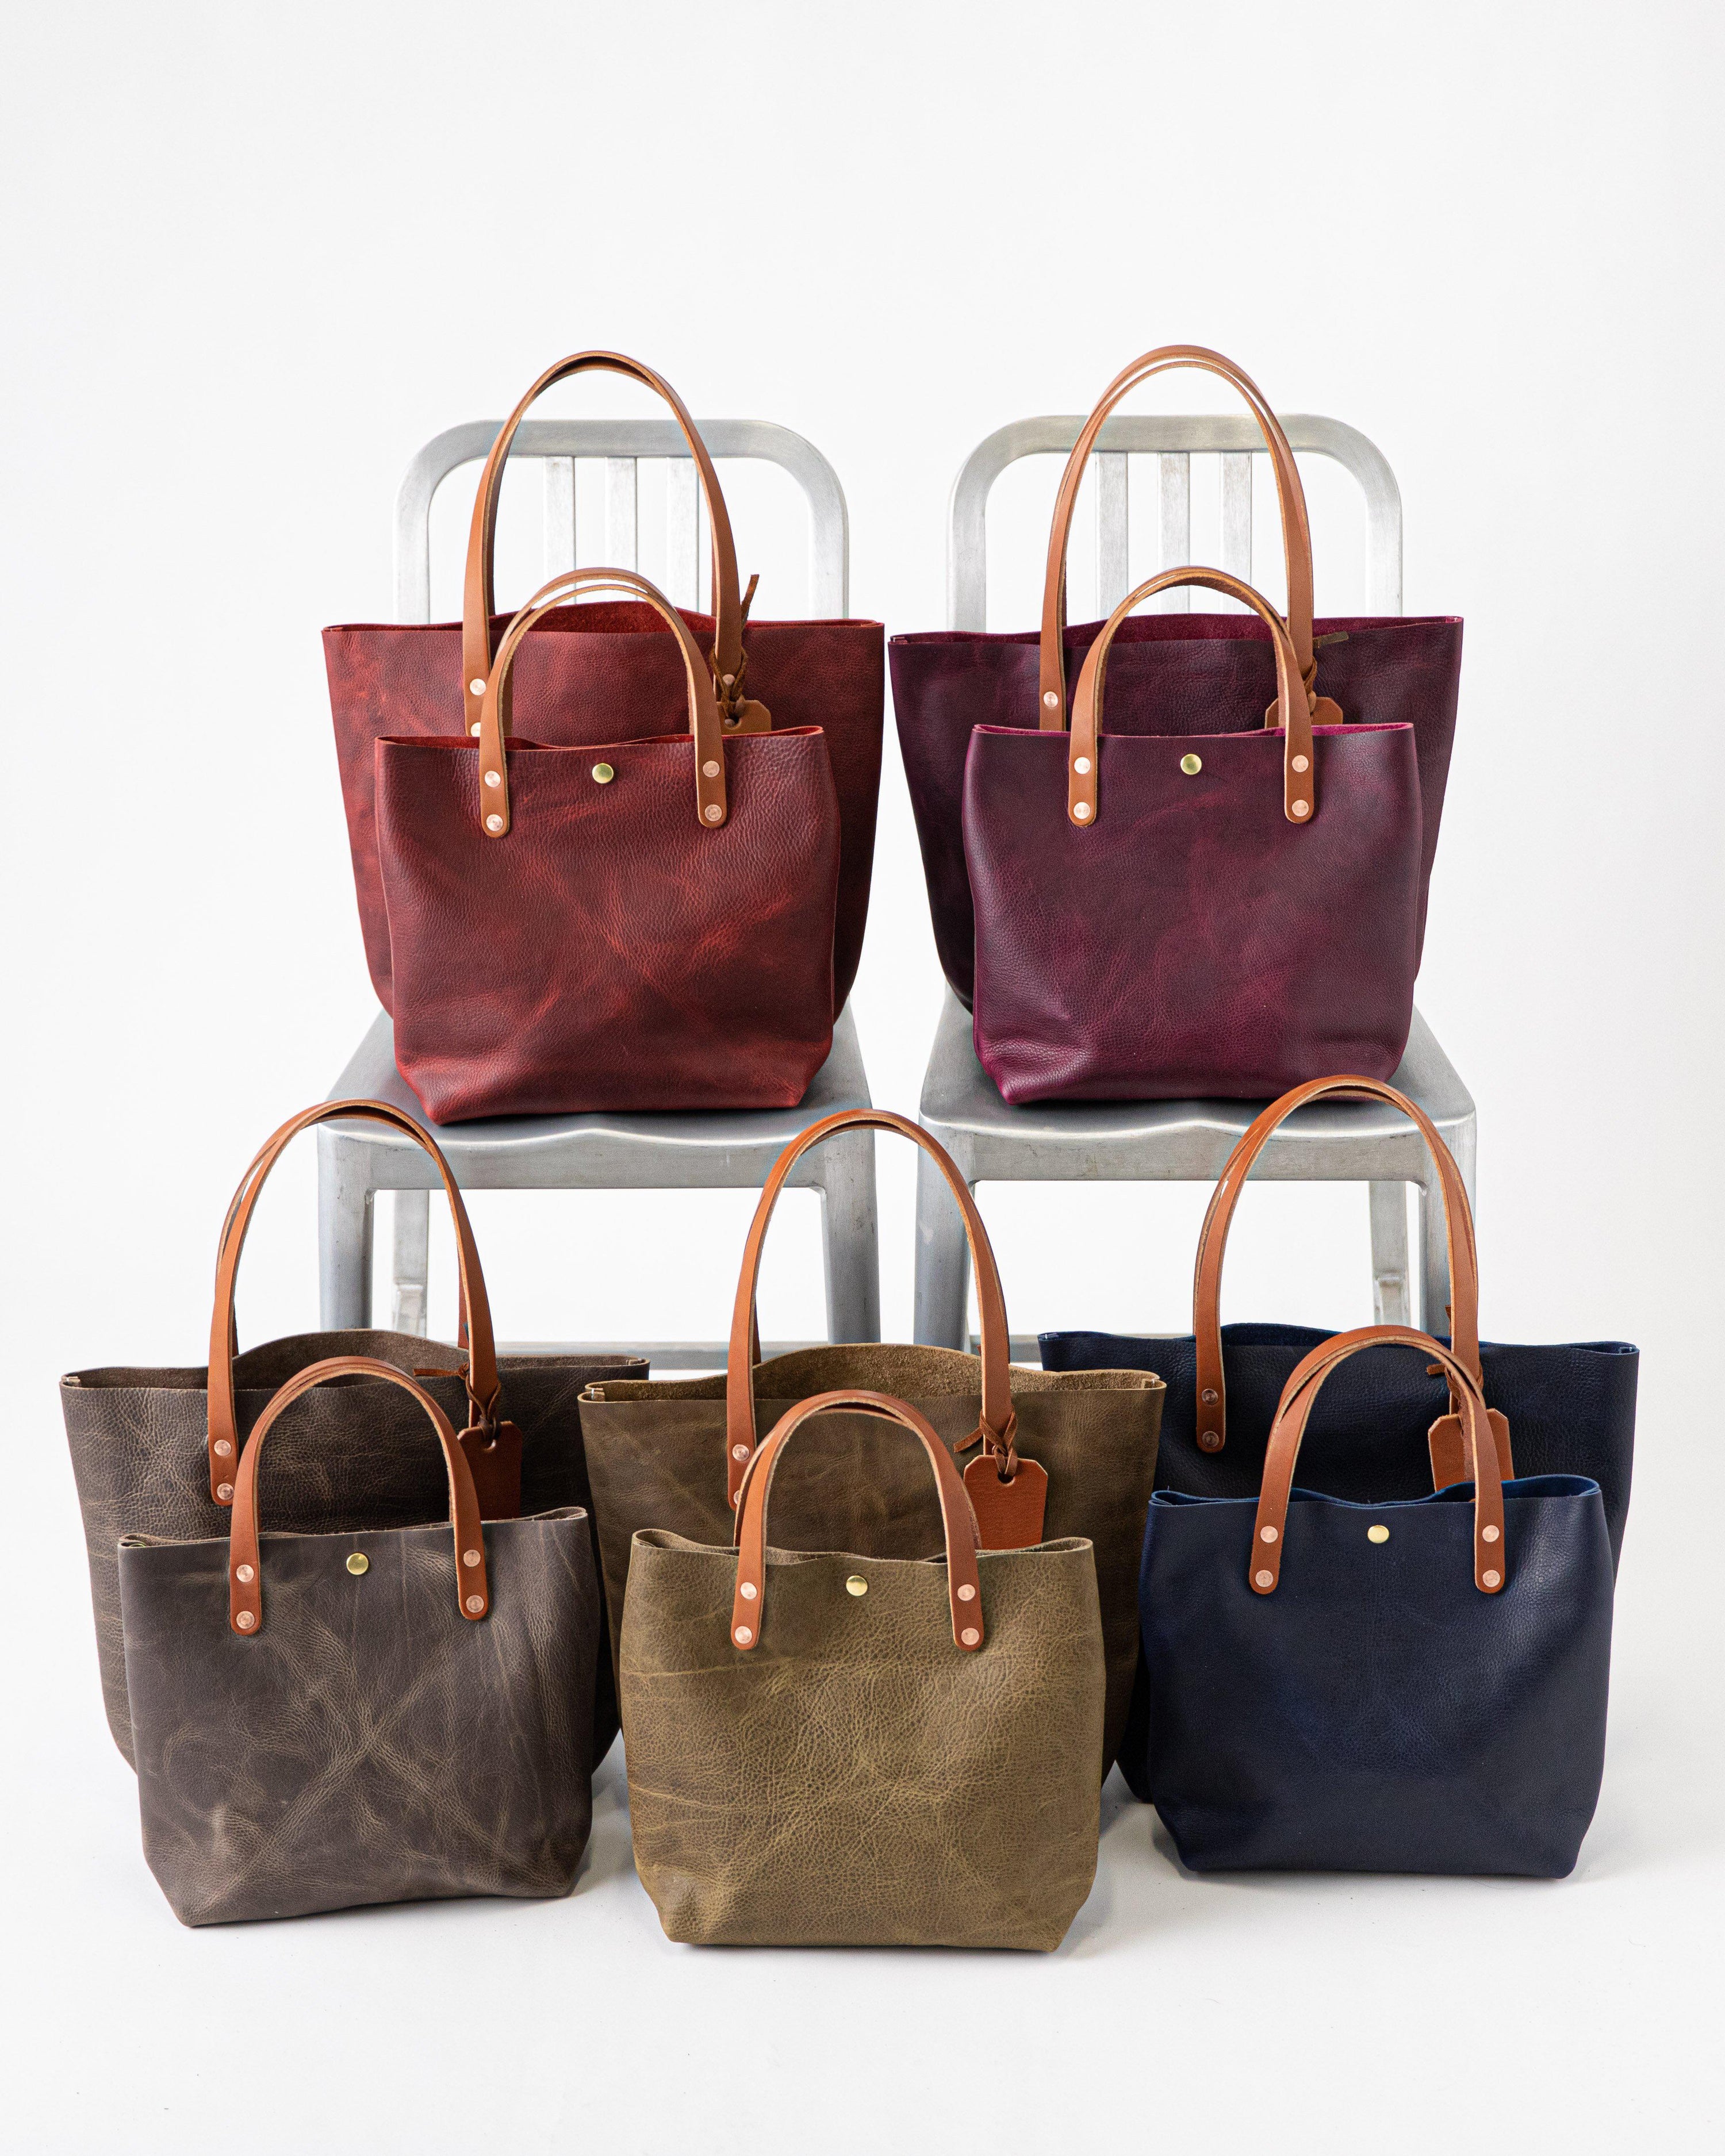 New Arrivals: 5 New Colors of Kodiak Leather Totes!